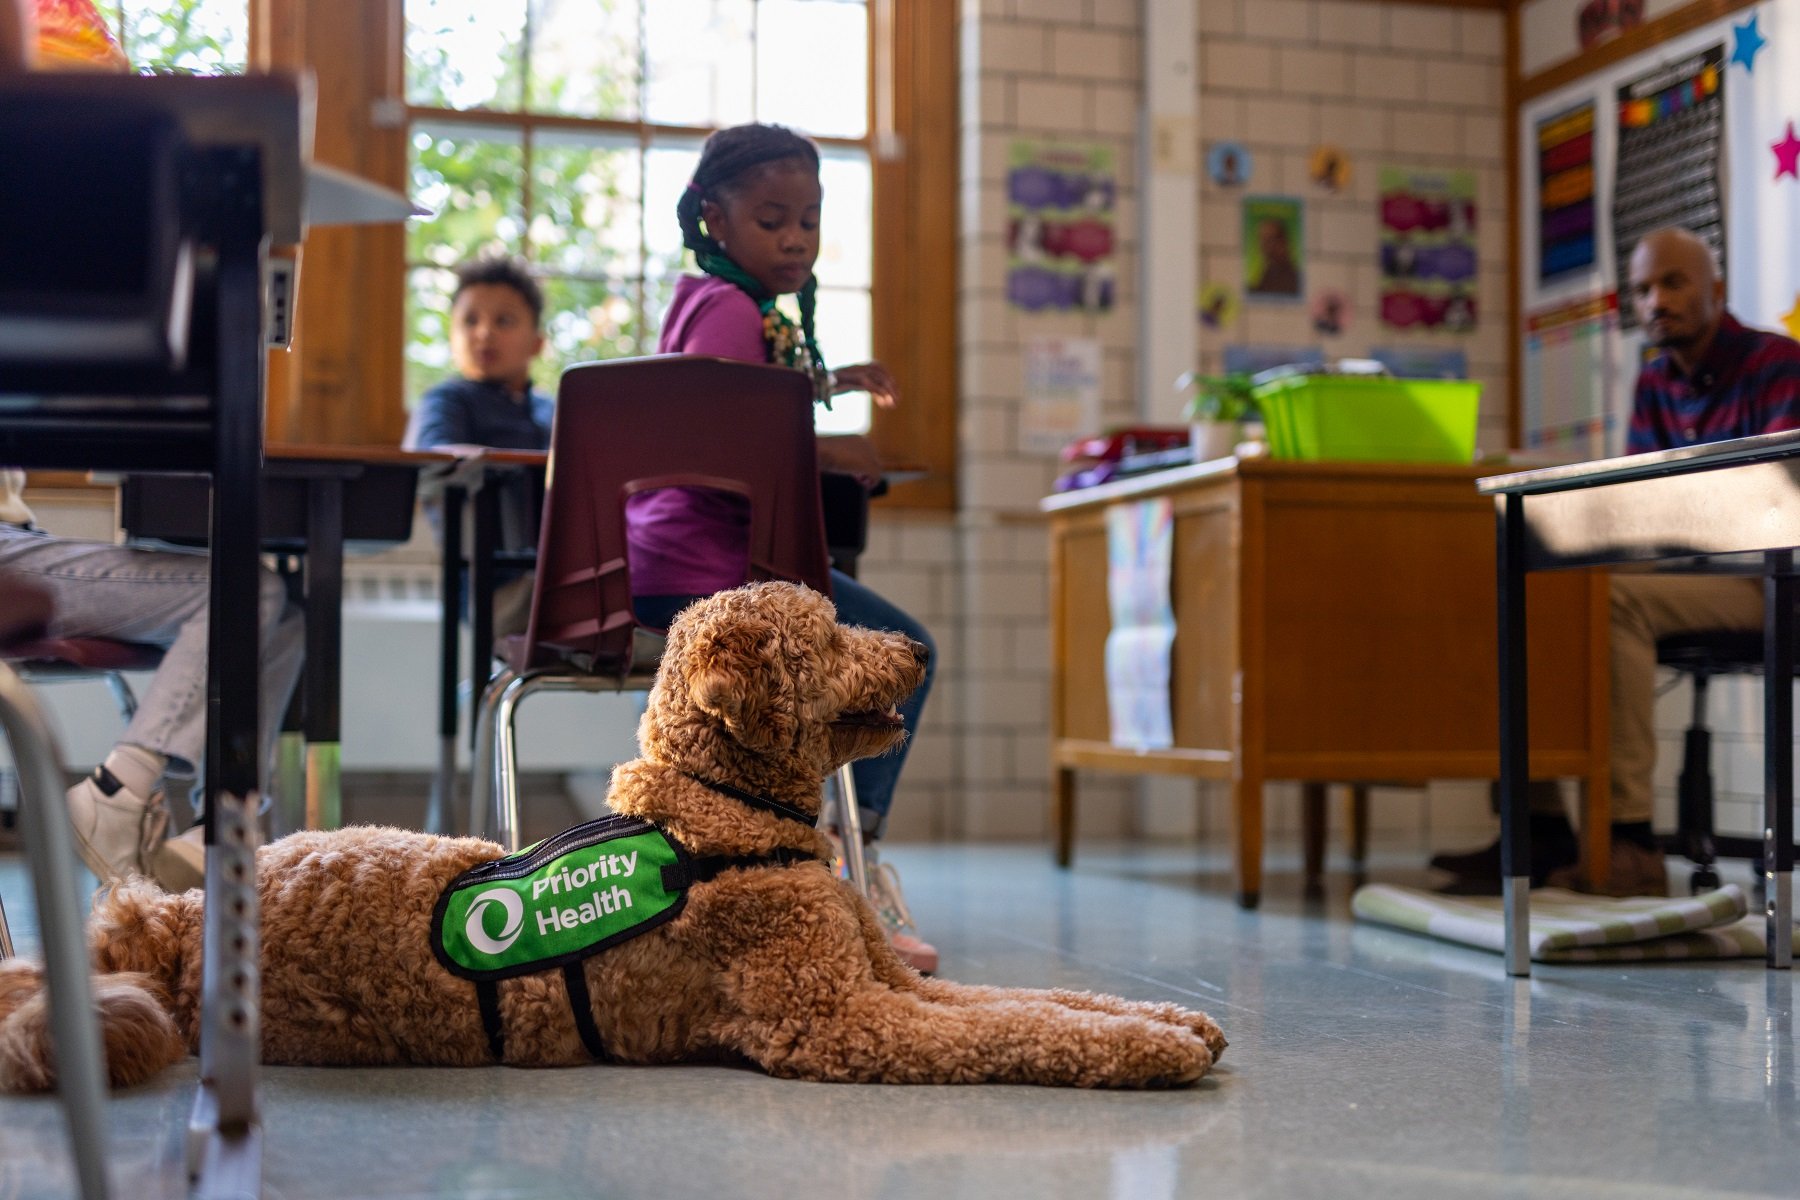 Priority Health launches program to back placement of service dogs in schools